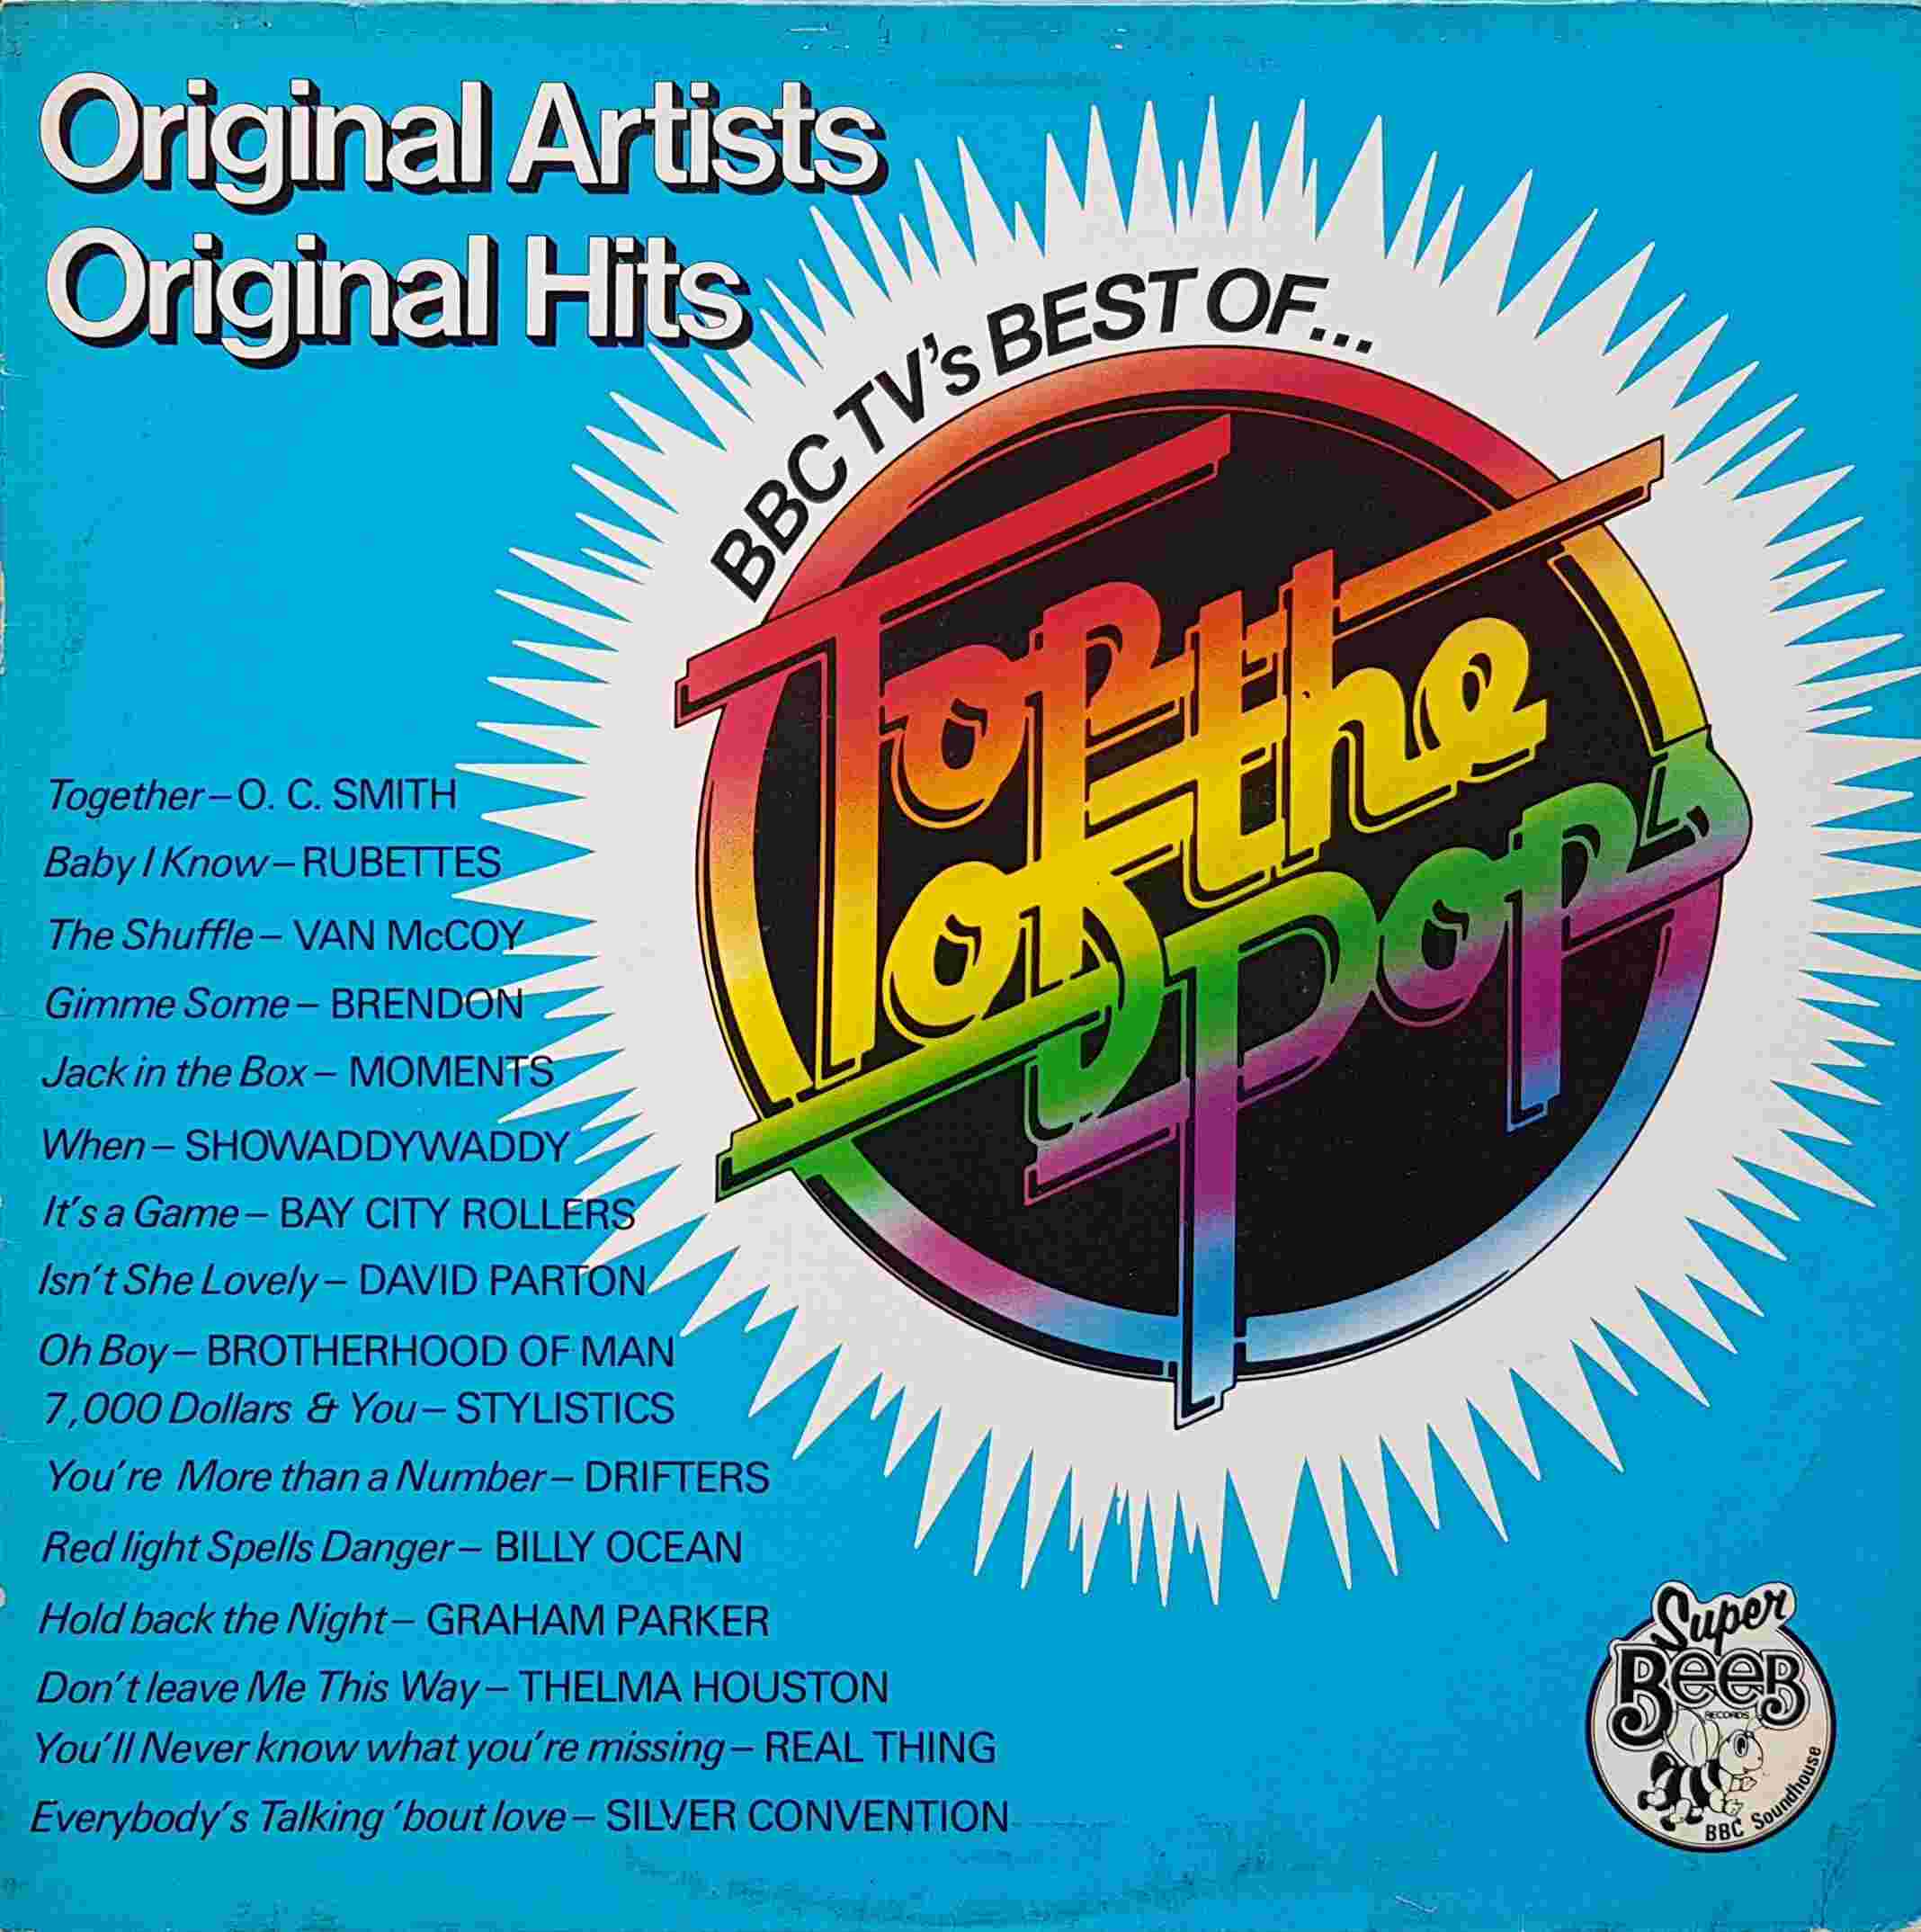 Picture of BELP 010 BBC TV's best of top of the pops - Volume 5 by artist Various from the BBC albums - Records and Tapes library